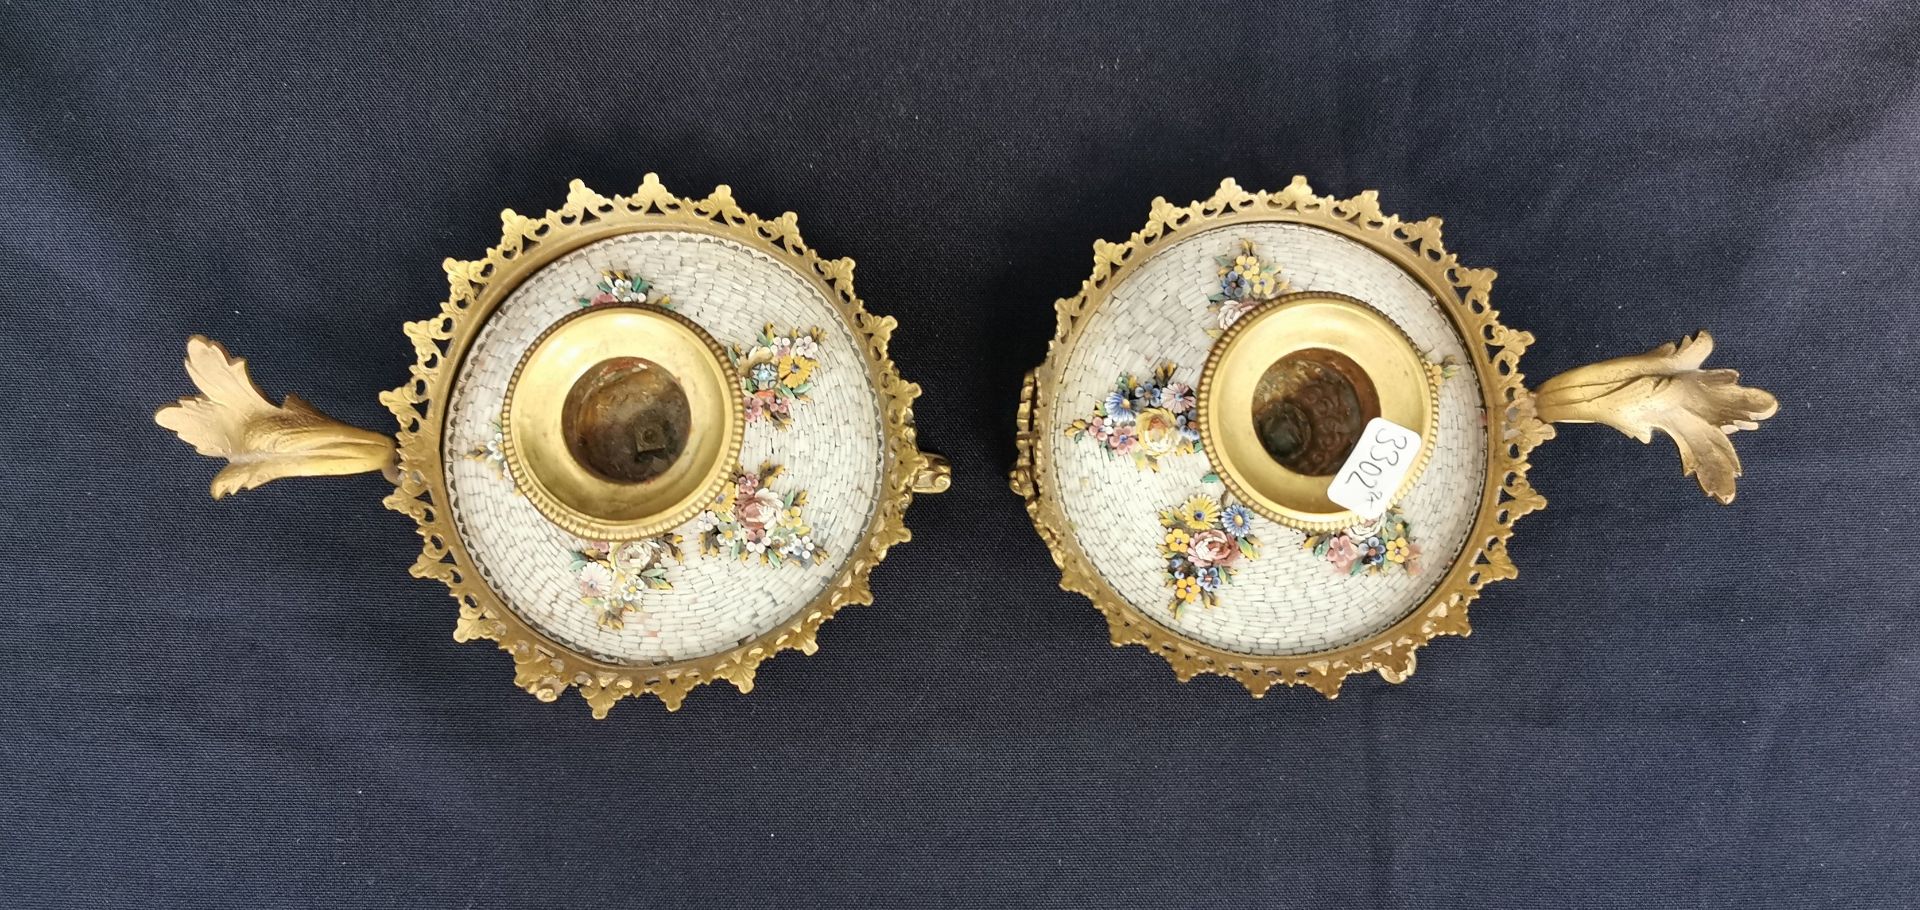 PAIR OF CANDLE HOLDERS - Image 2 of 4